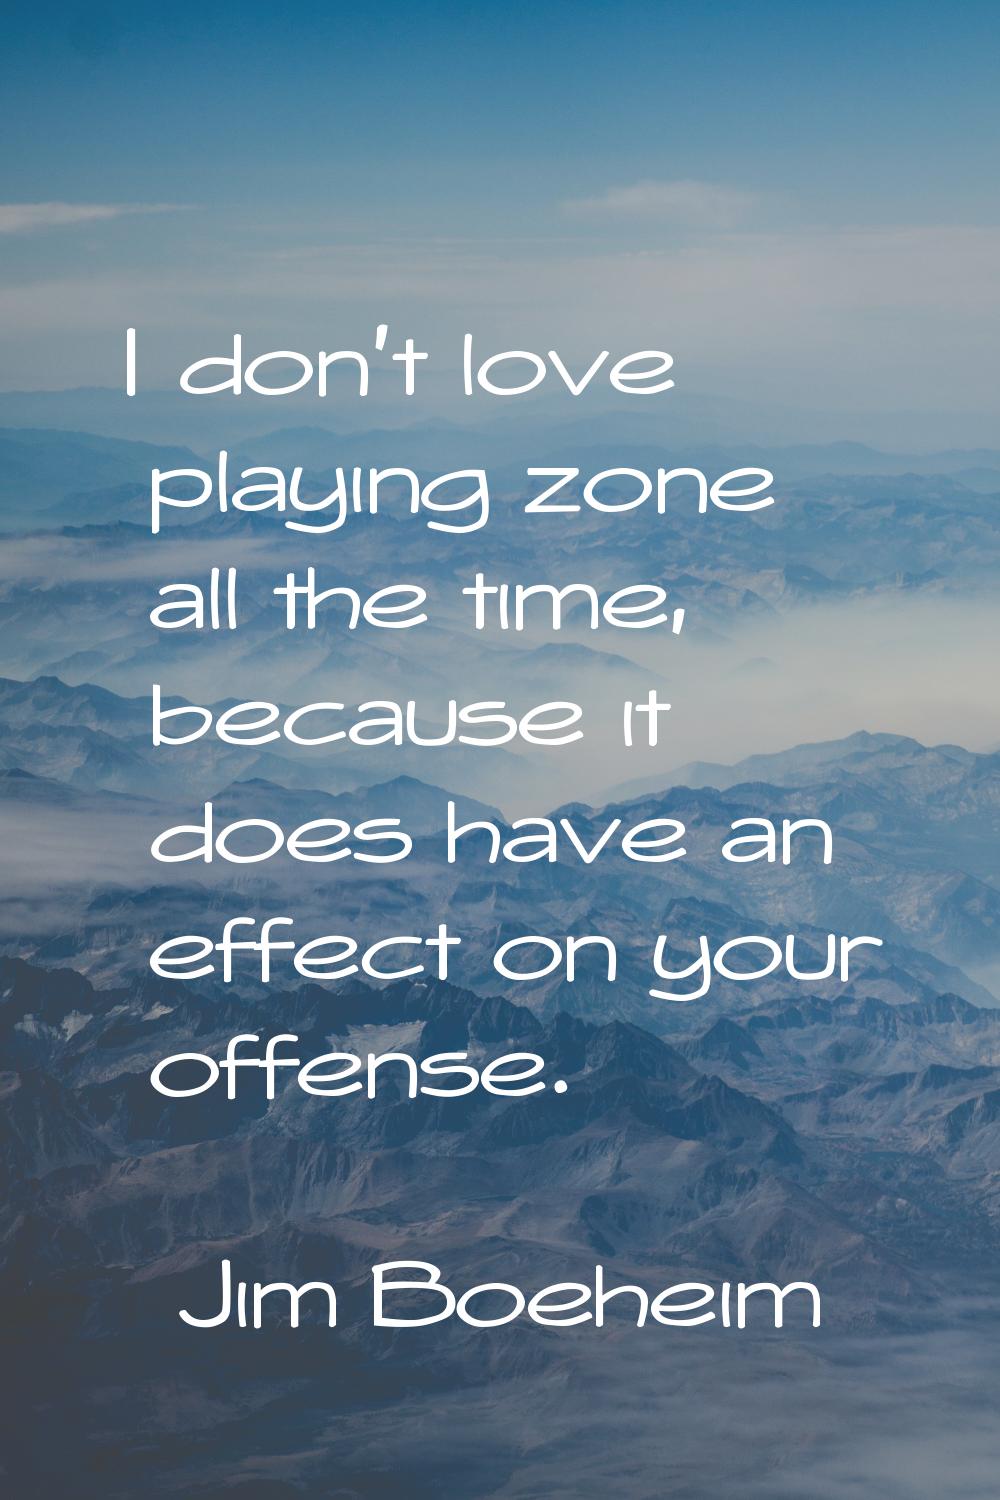 I don't love playing zone all the time, because it does have an effect on your offense.